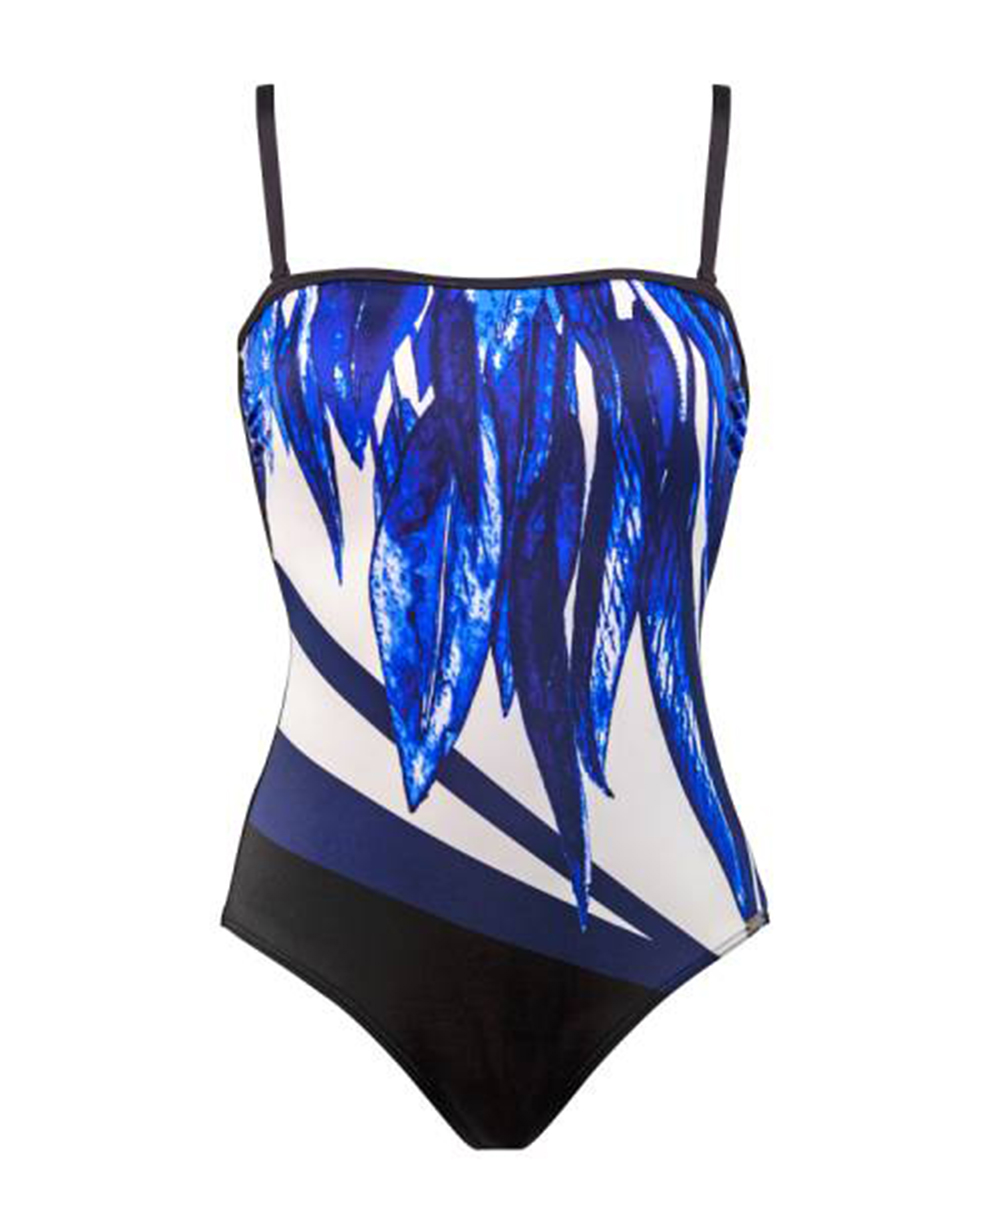 One piece body shaping swimsuit no wires removable straps blue leaves ...